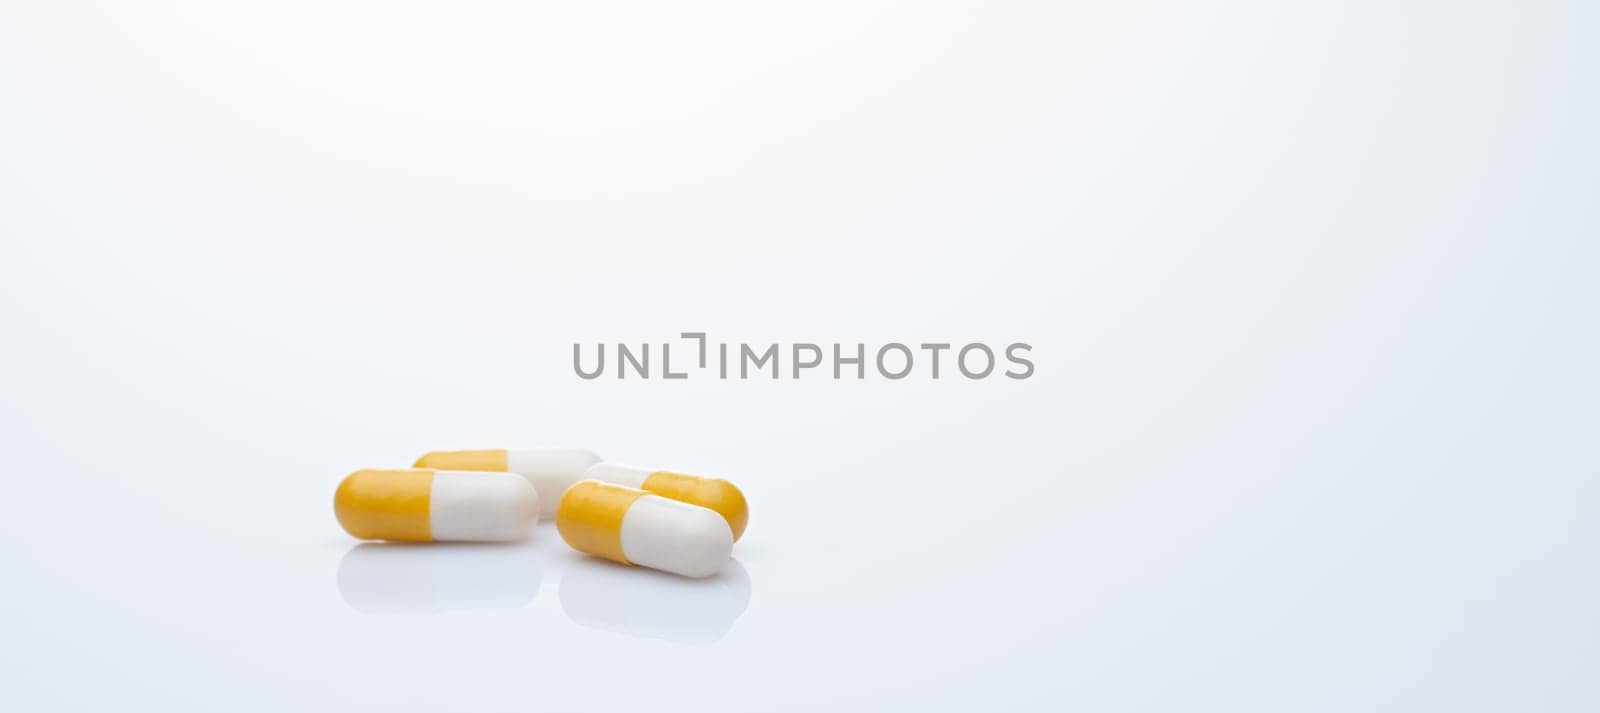 Yellow-white probiotic capsule pill on white background. Probiotic supplement. Gut health. Dietary supplements. Probiotics for a healthy gut. Lactobacillus acidophilus and Bifidobacterium animalis. by Fahroni